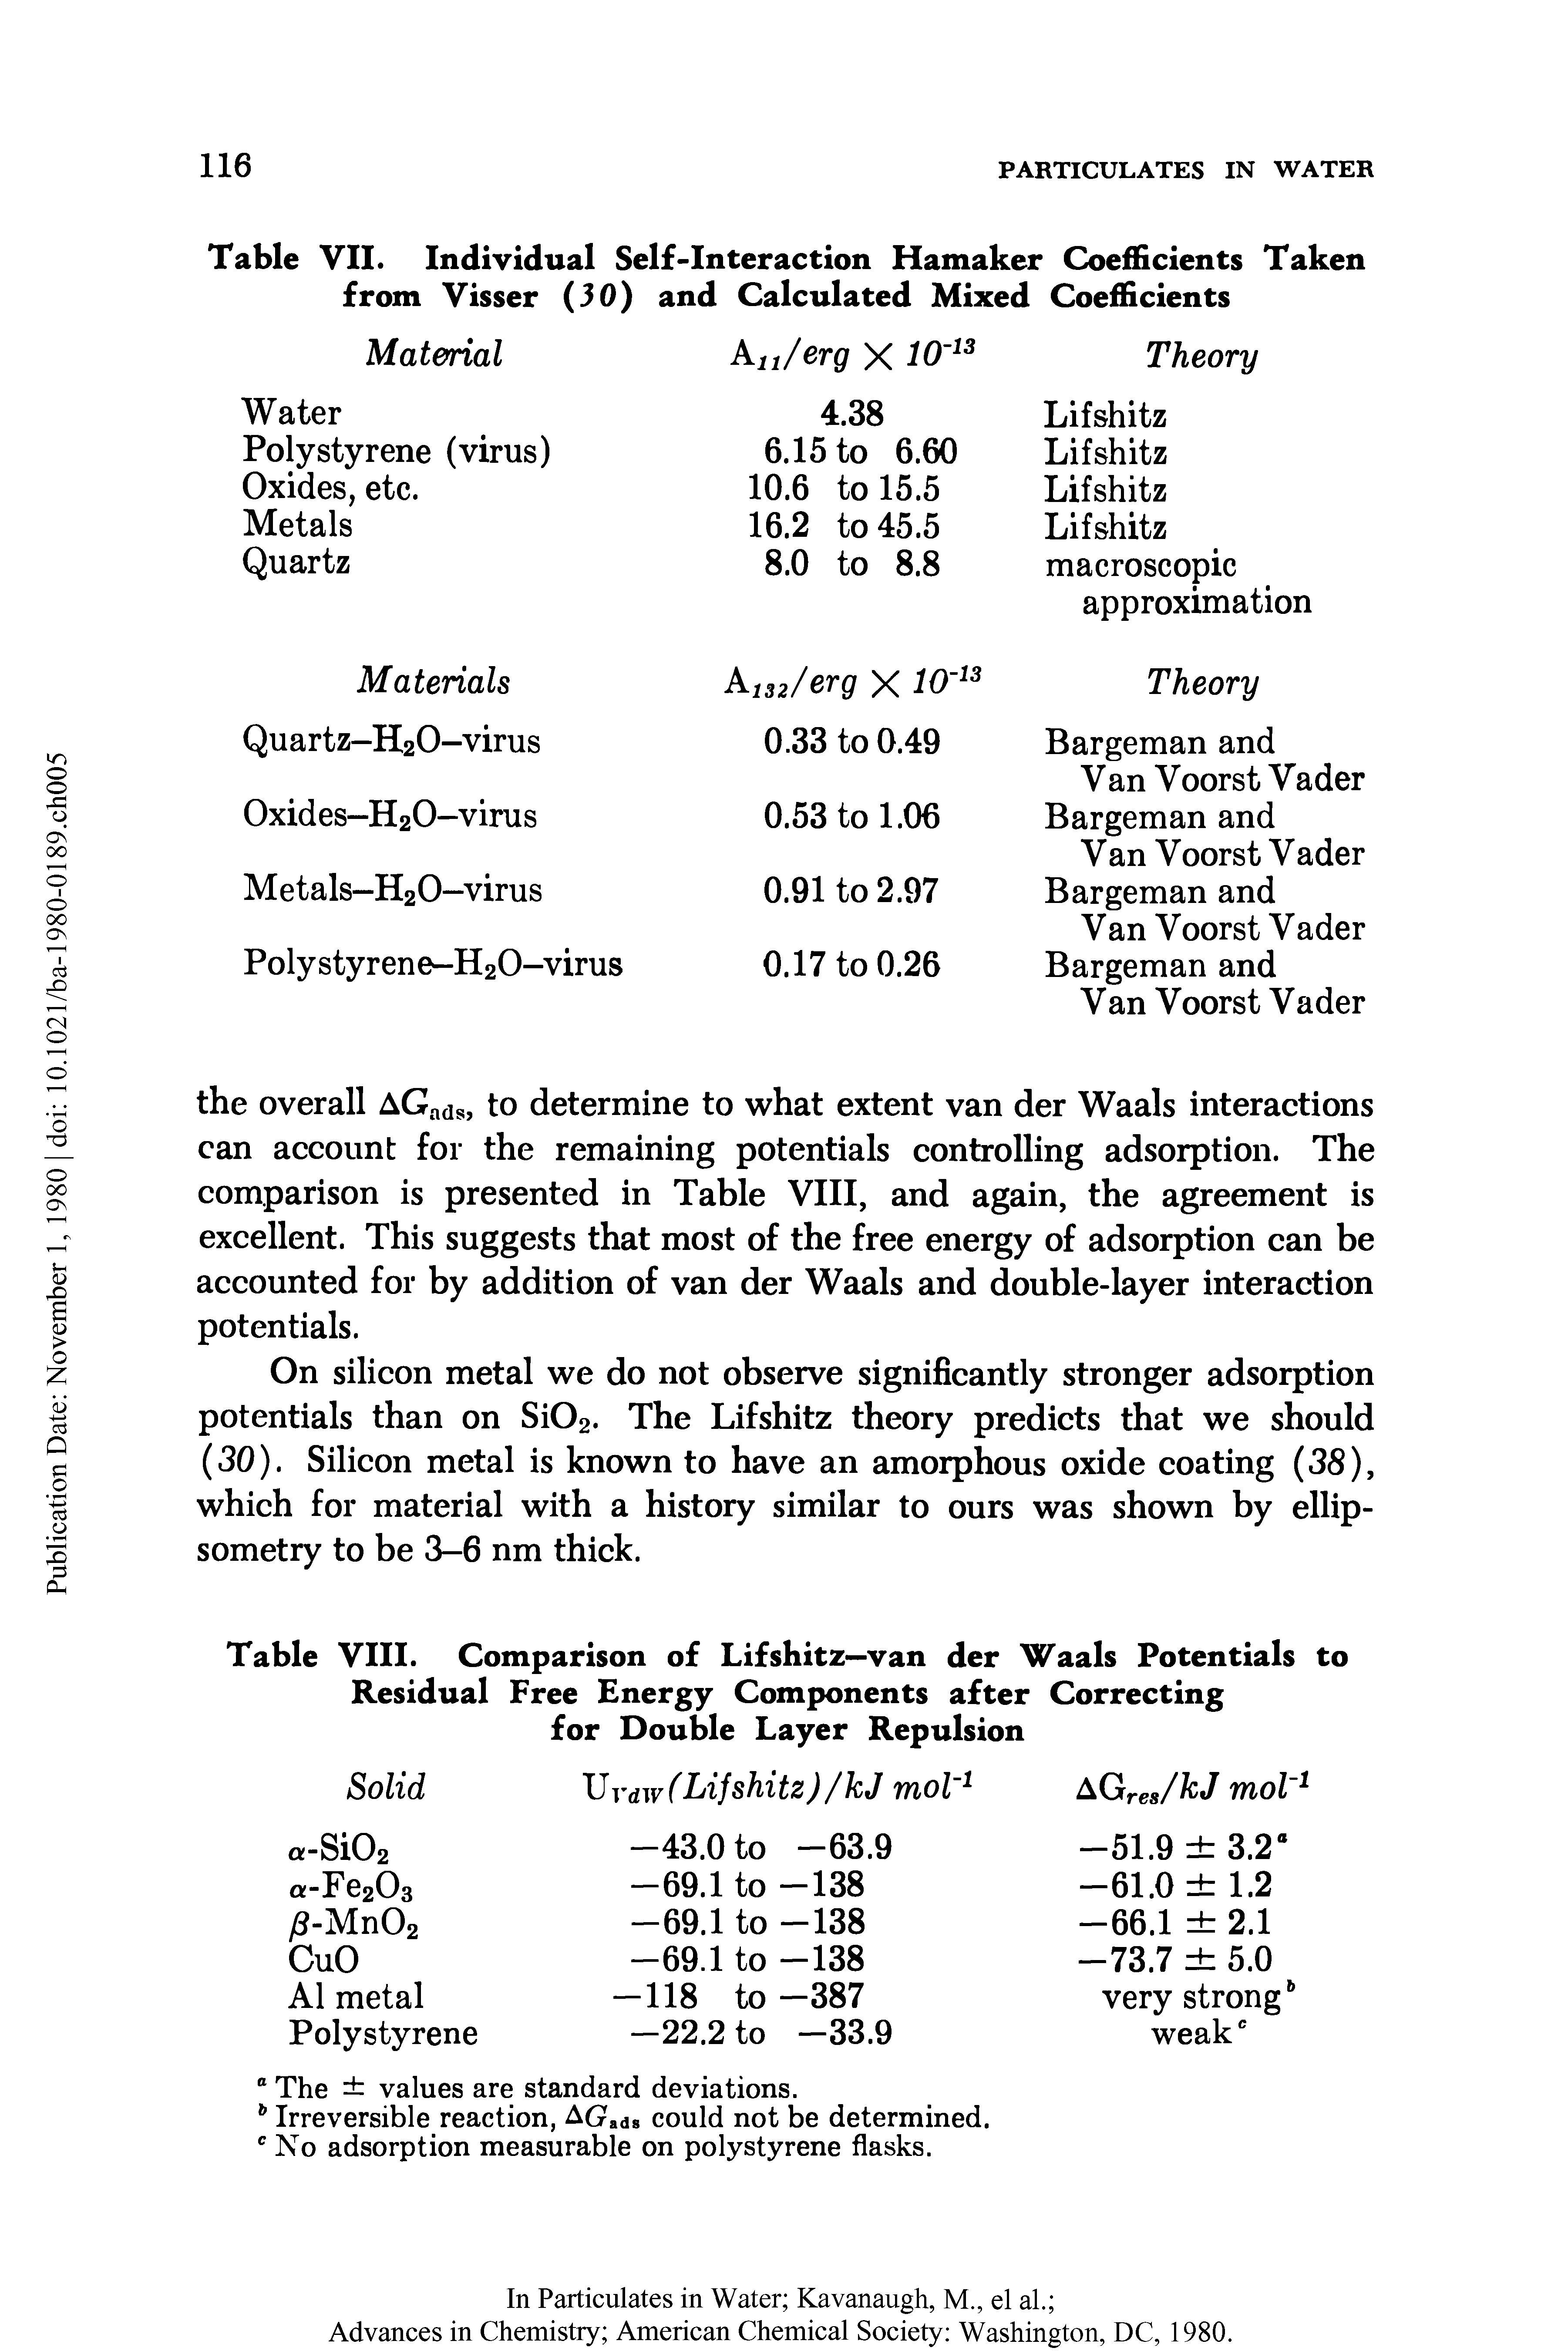 Table VIII. Comparison of Lifshitz—van der Waals Potentials to Residual Free Energy Components after Correcting for Double Layer Repulsion...